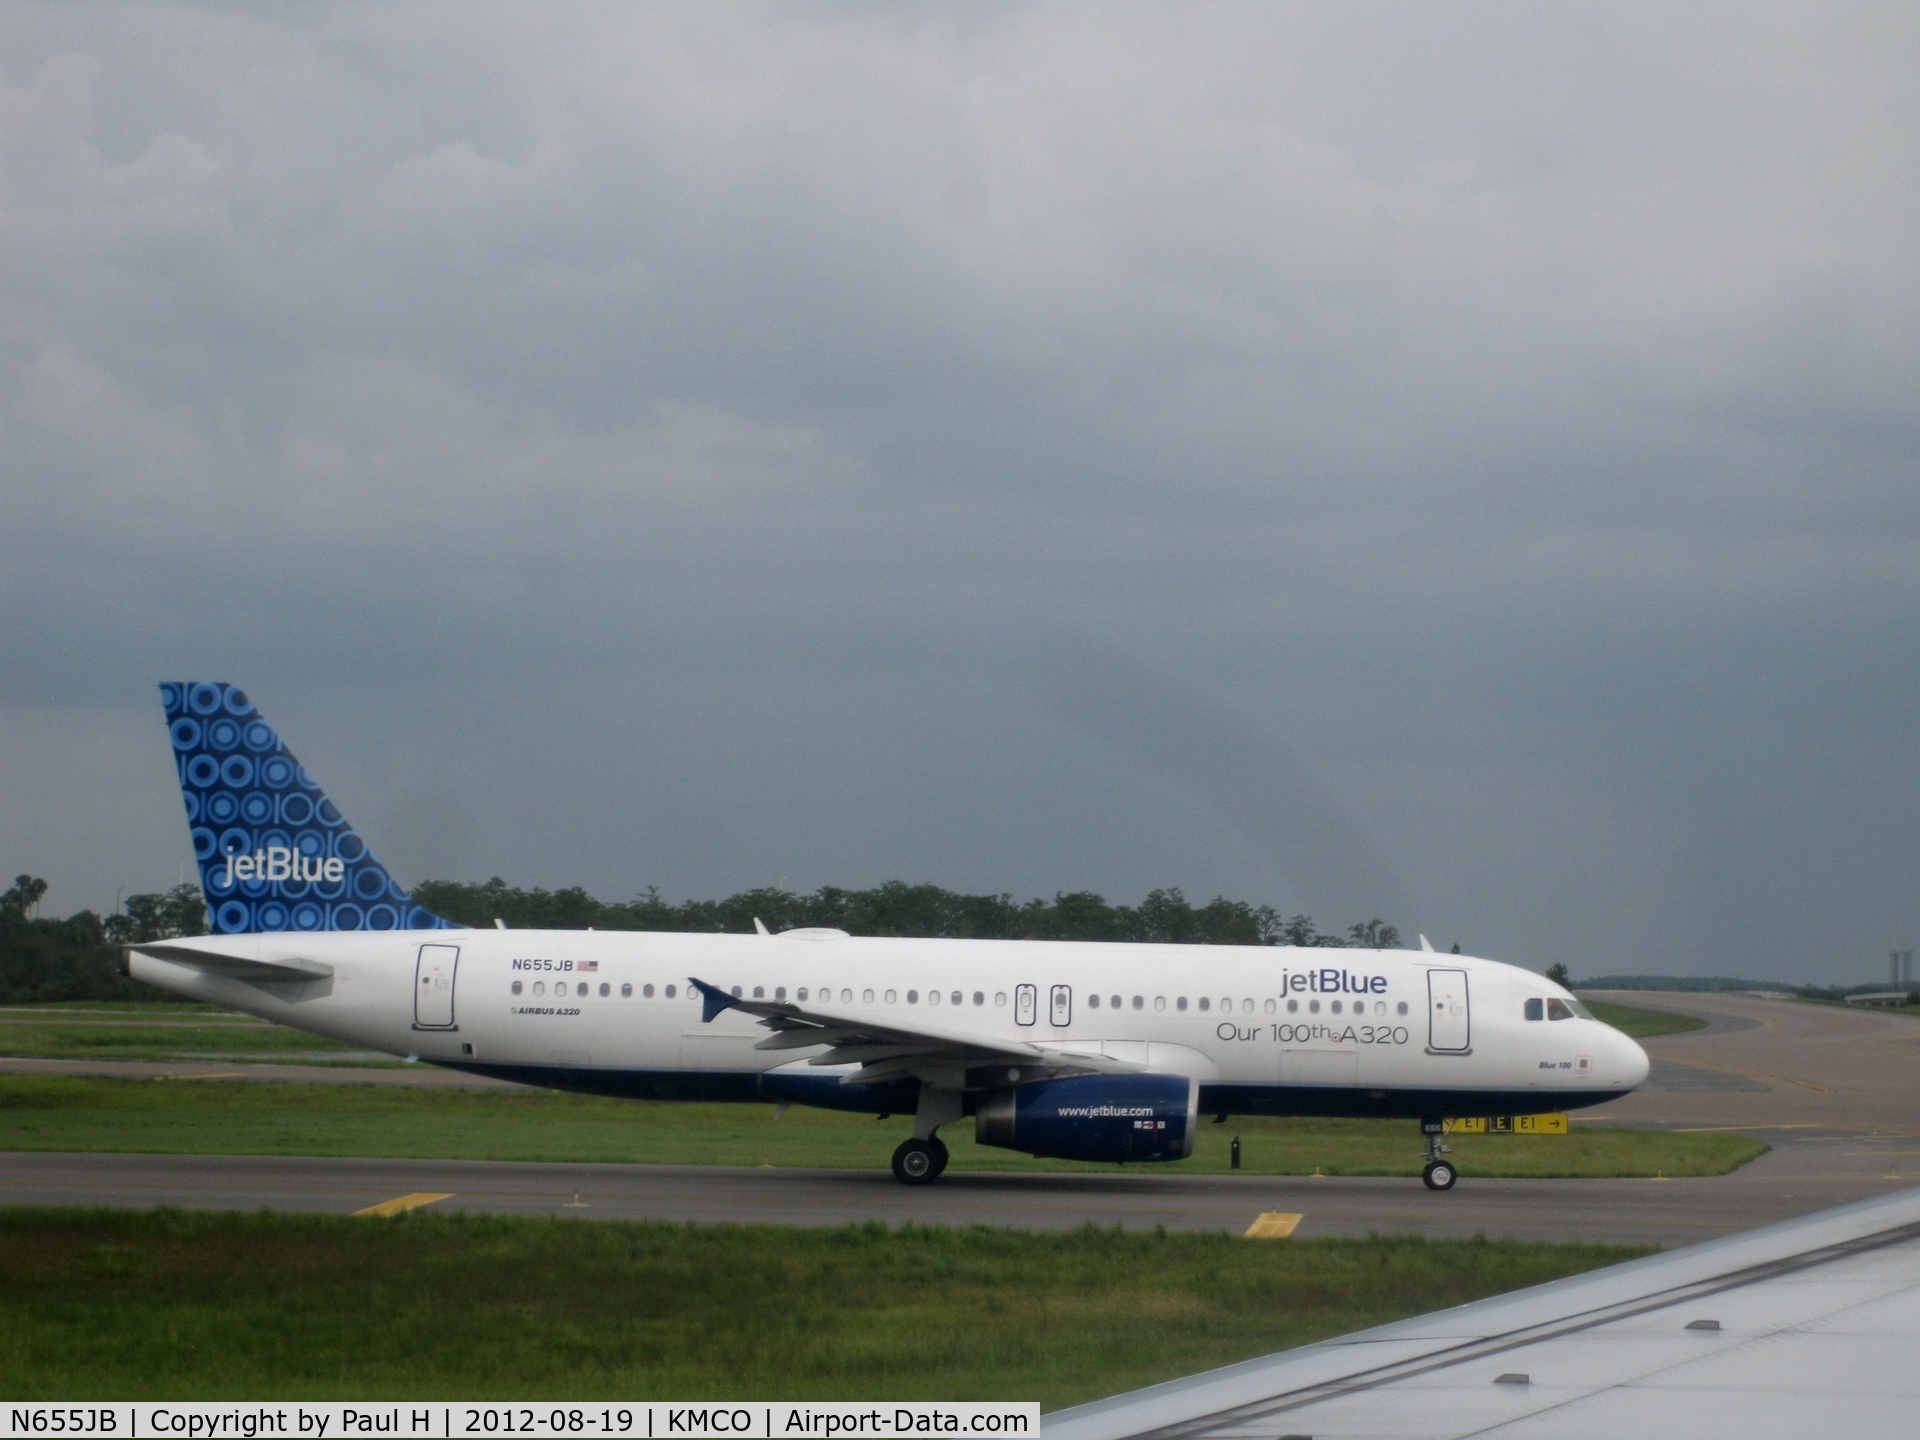 N655JB, 2007 Airbus A320-232 C/N 3072, 100th A-320 of JetBlue, special livery